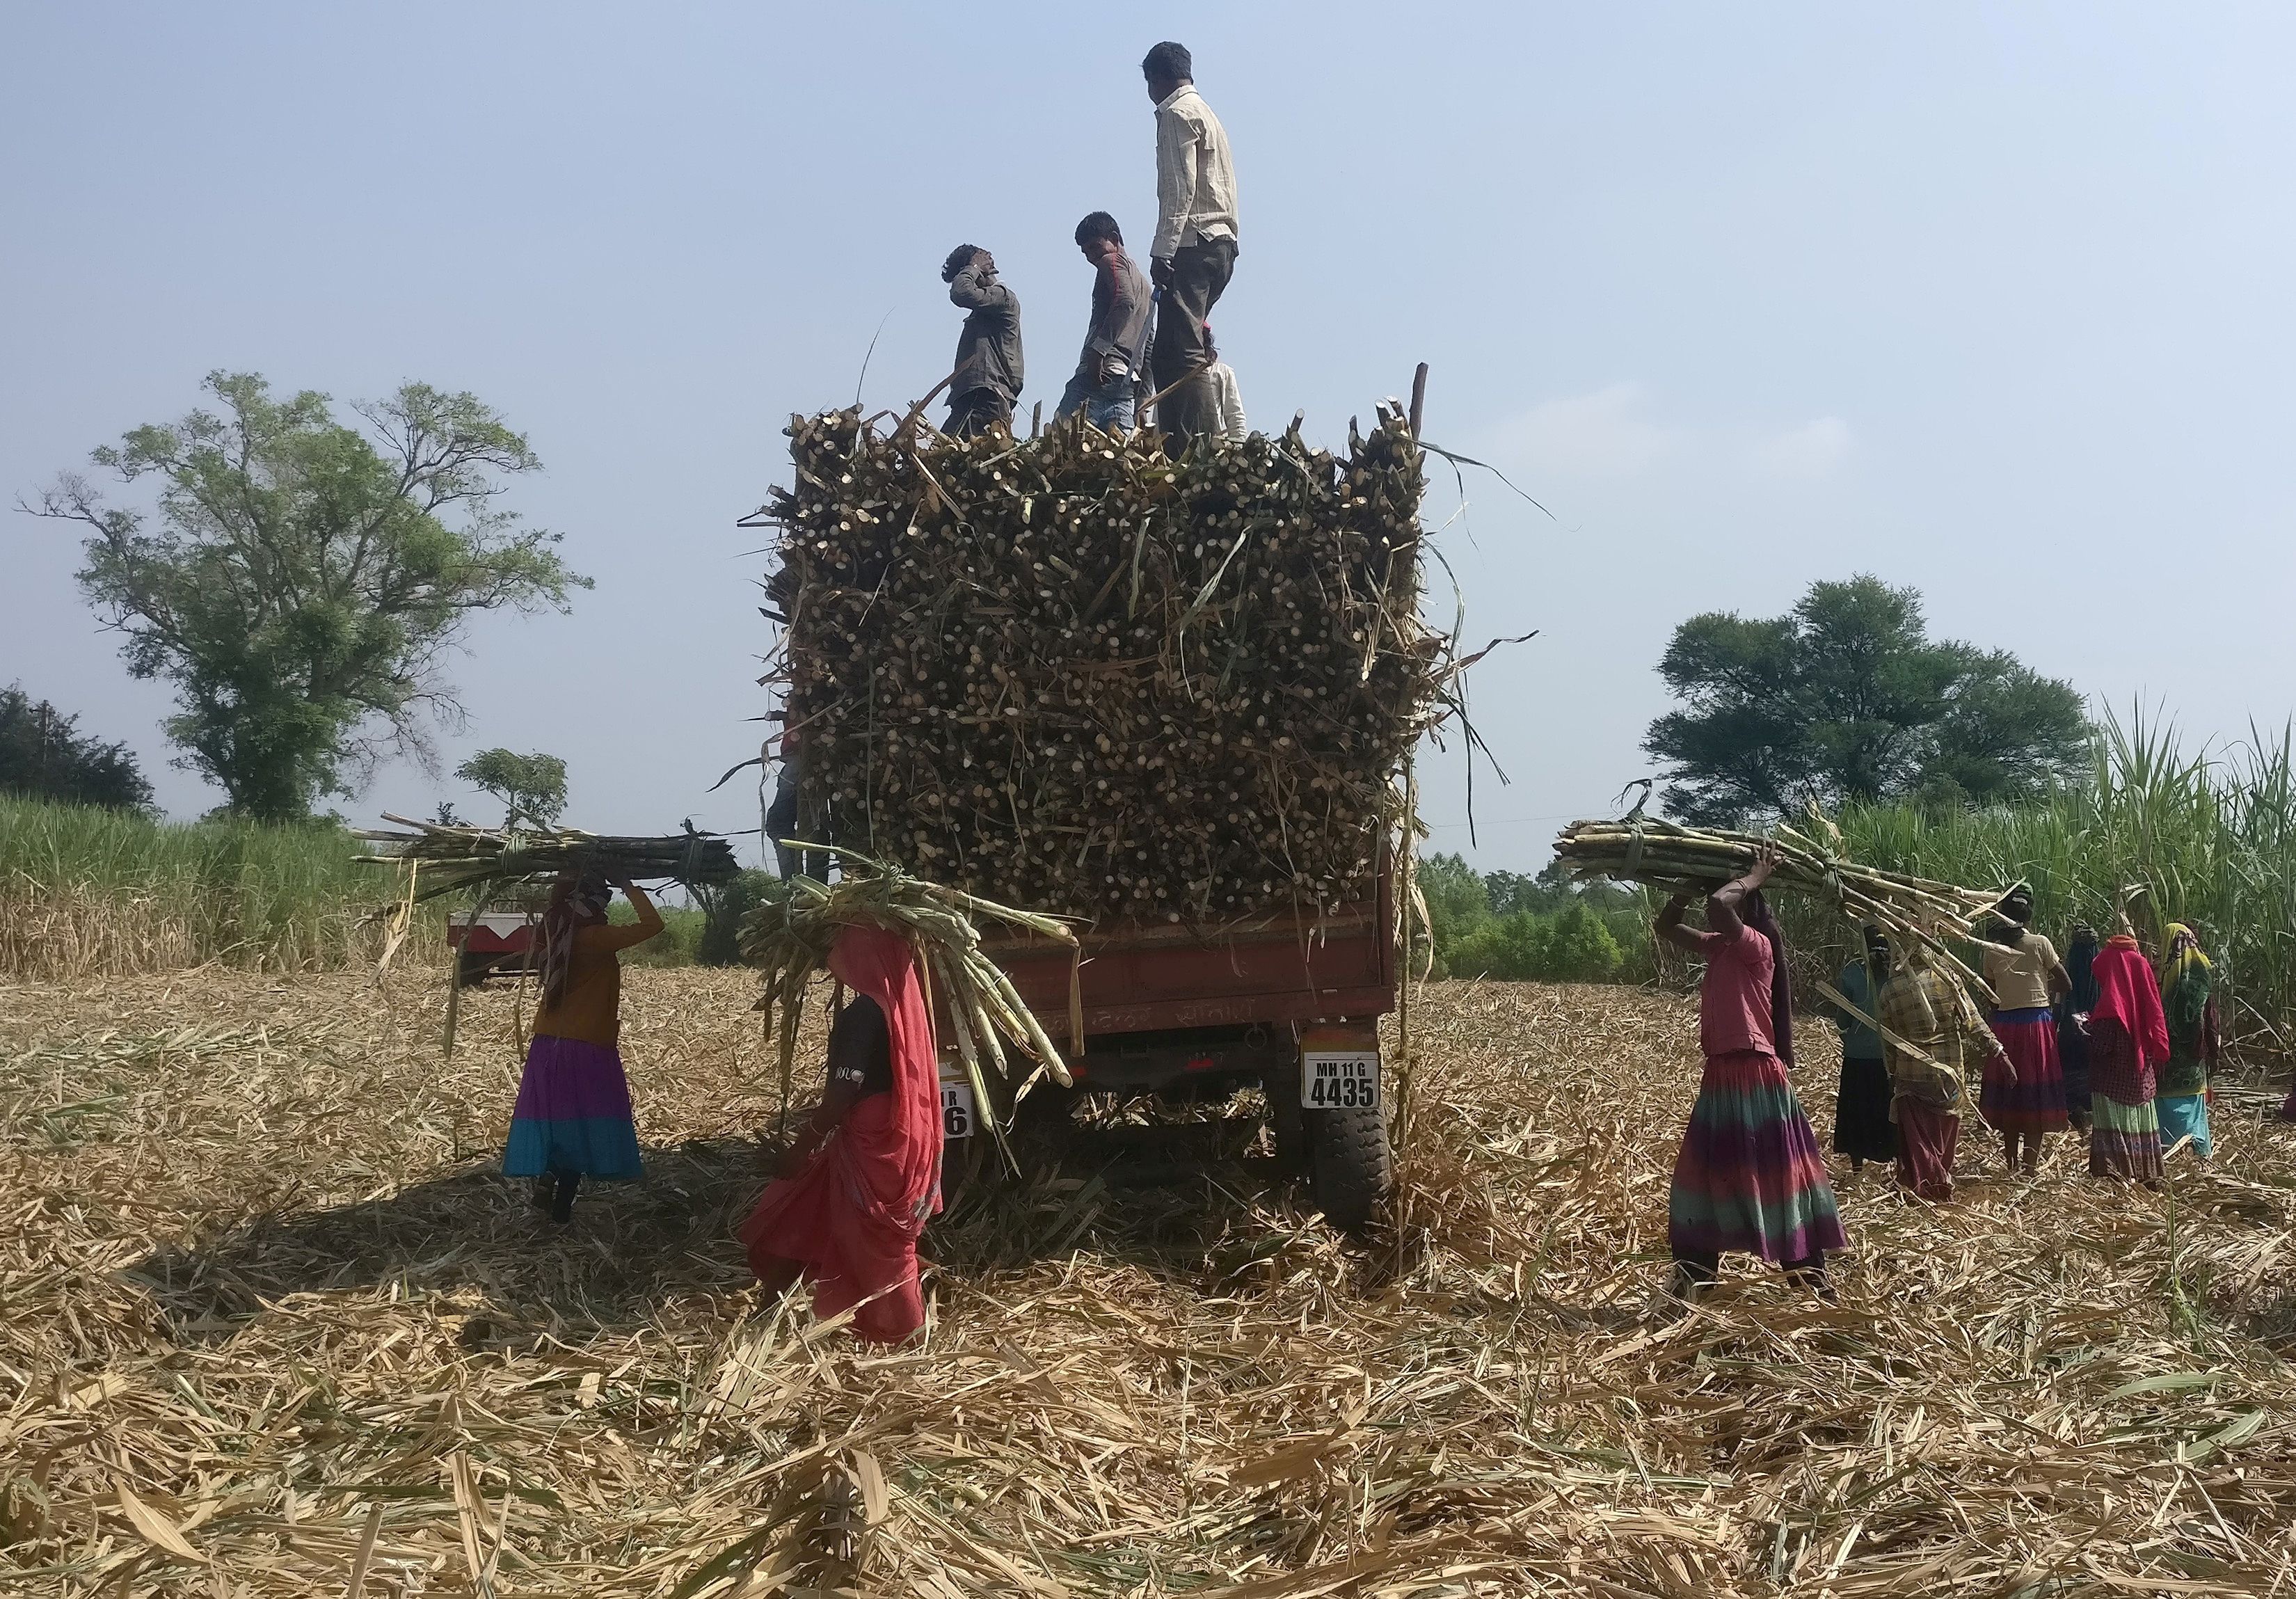 Workers load harvested sugarcane onto a trailer in a field in Gove village